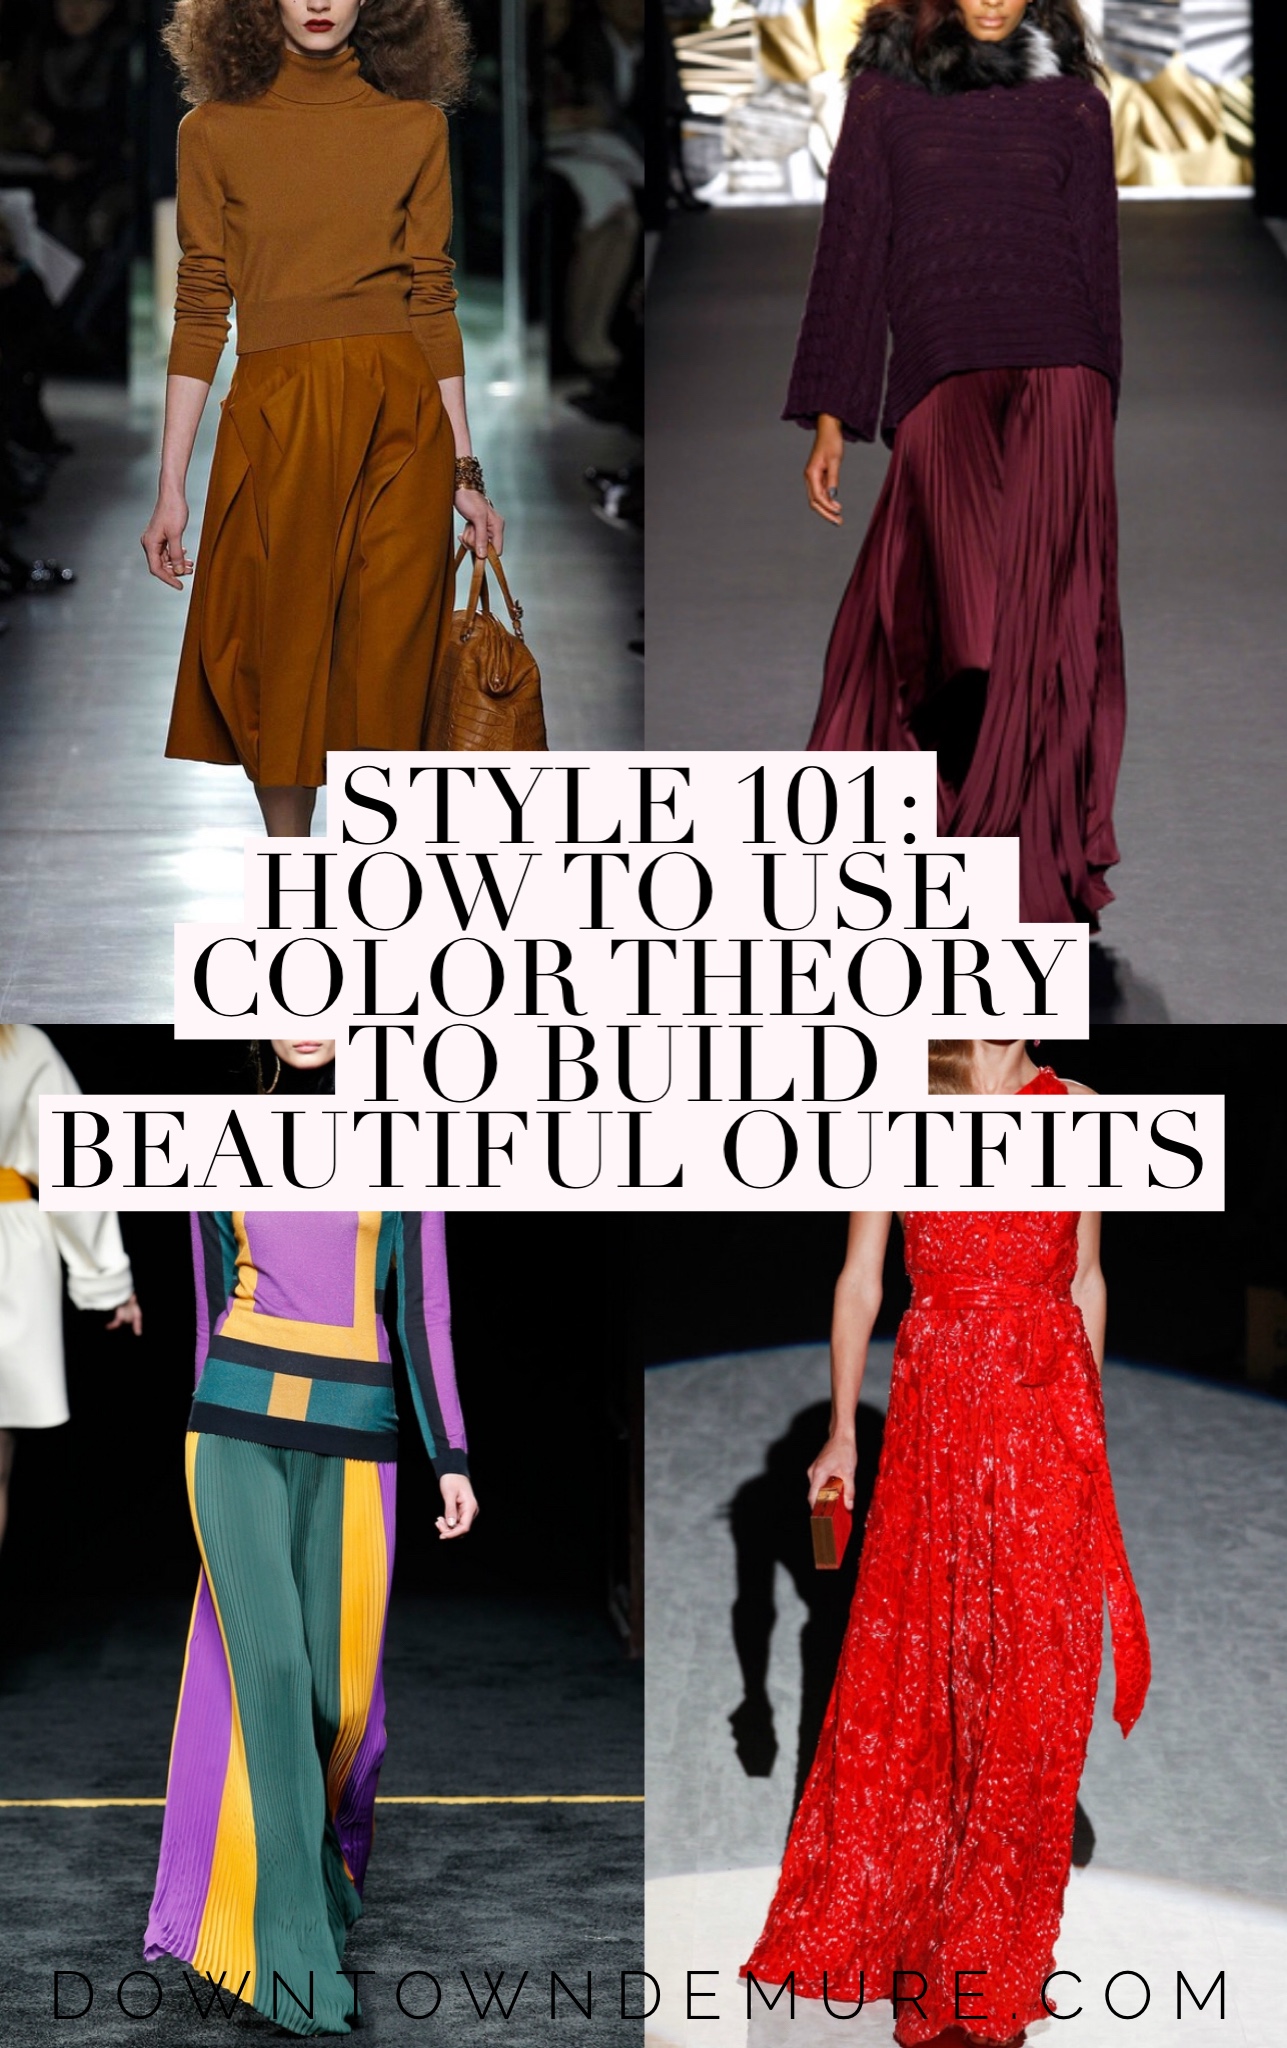 How To Use Color Theory to Build Beautiful Outfits - Downtown Demure